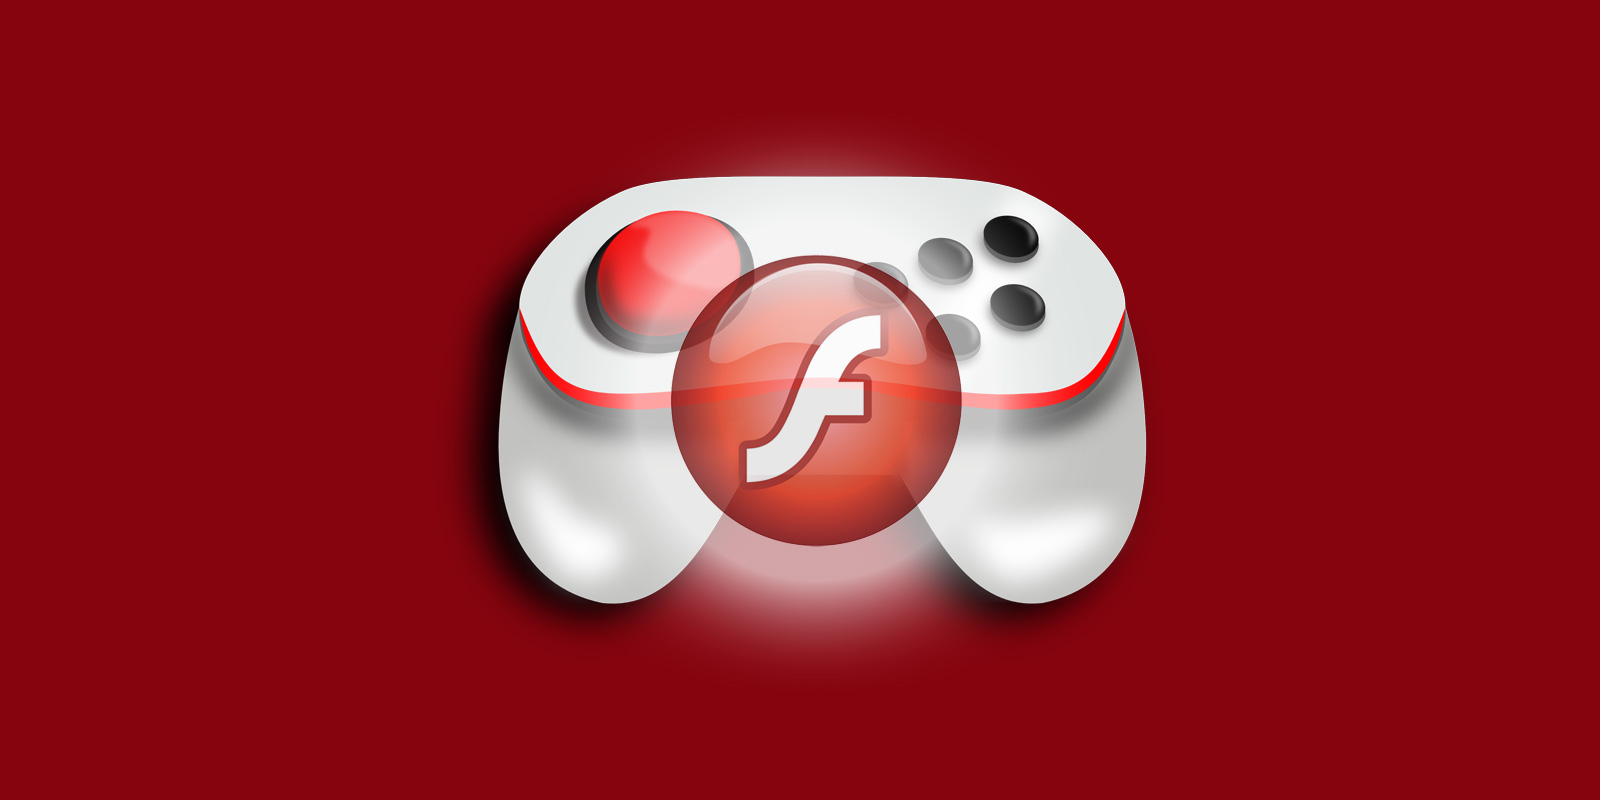 This Flash Player emulator lets you securely play your old games